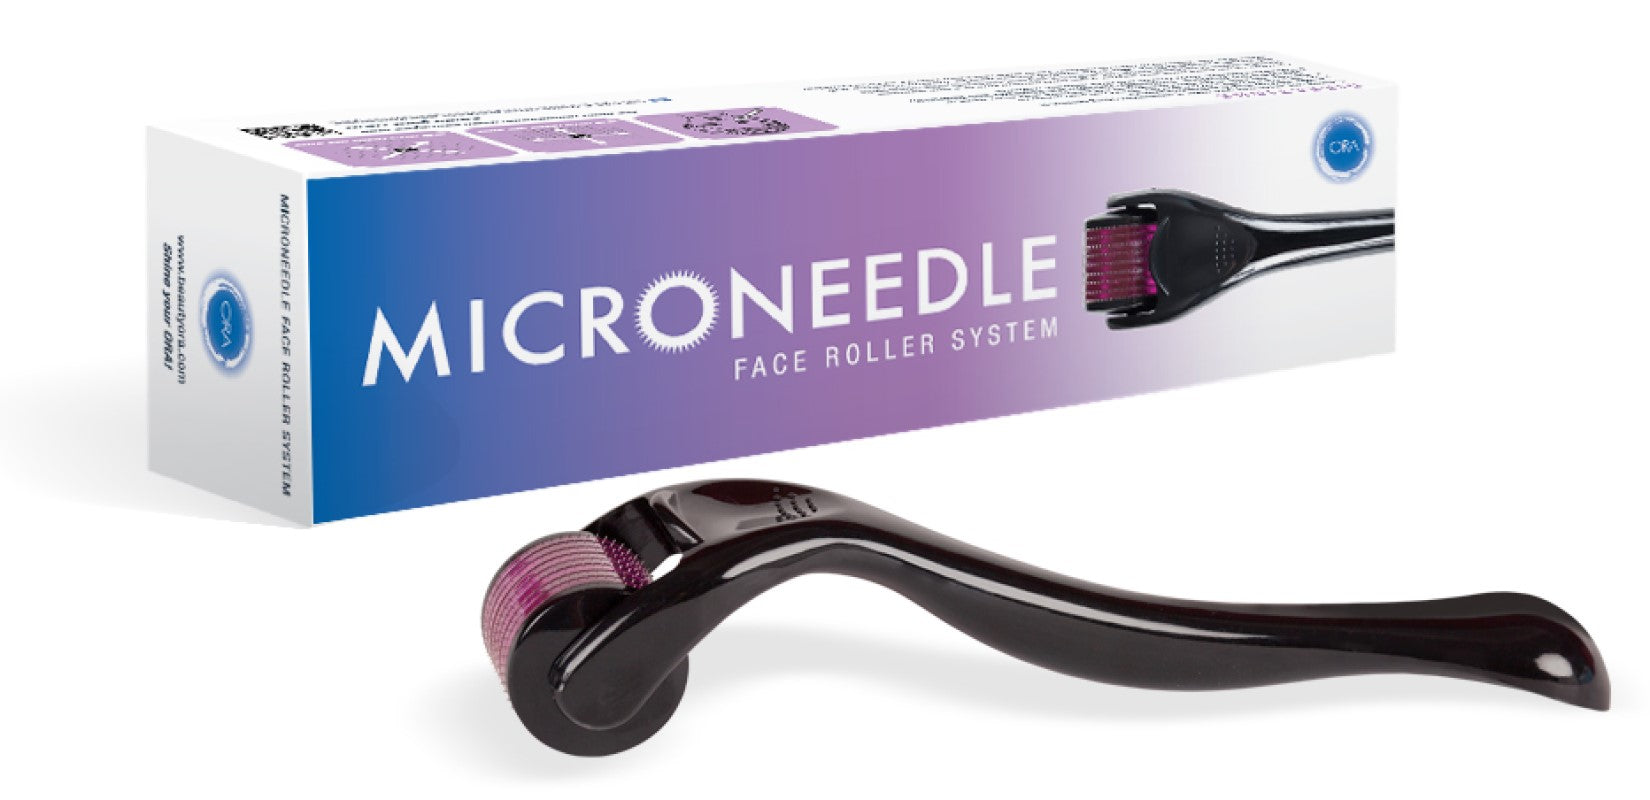 ORA Facial Microneedle Roller System (Anti-Wrinkles, Stretch Marks, Scars & Cellulite) - 0.25mm